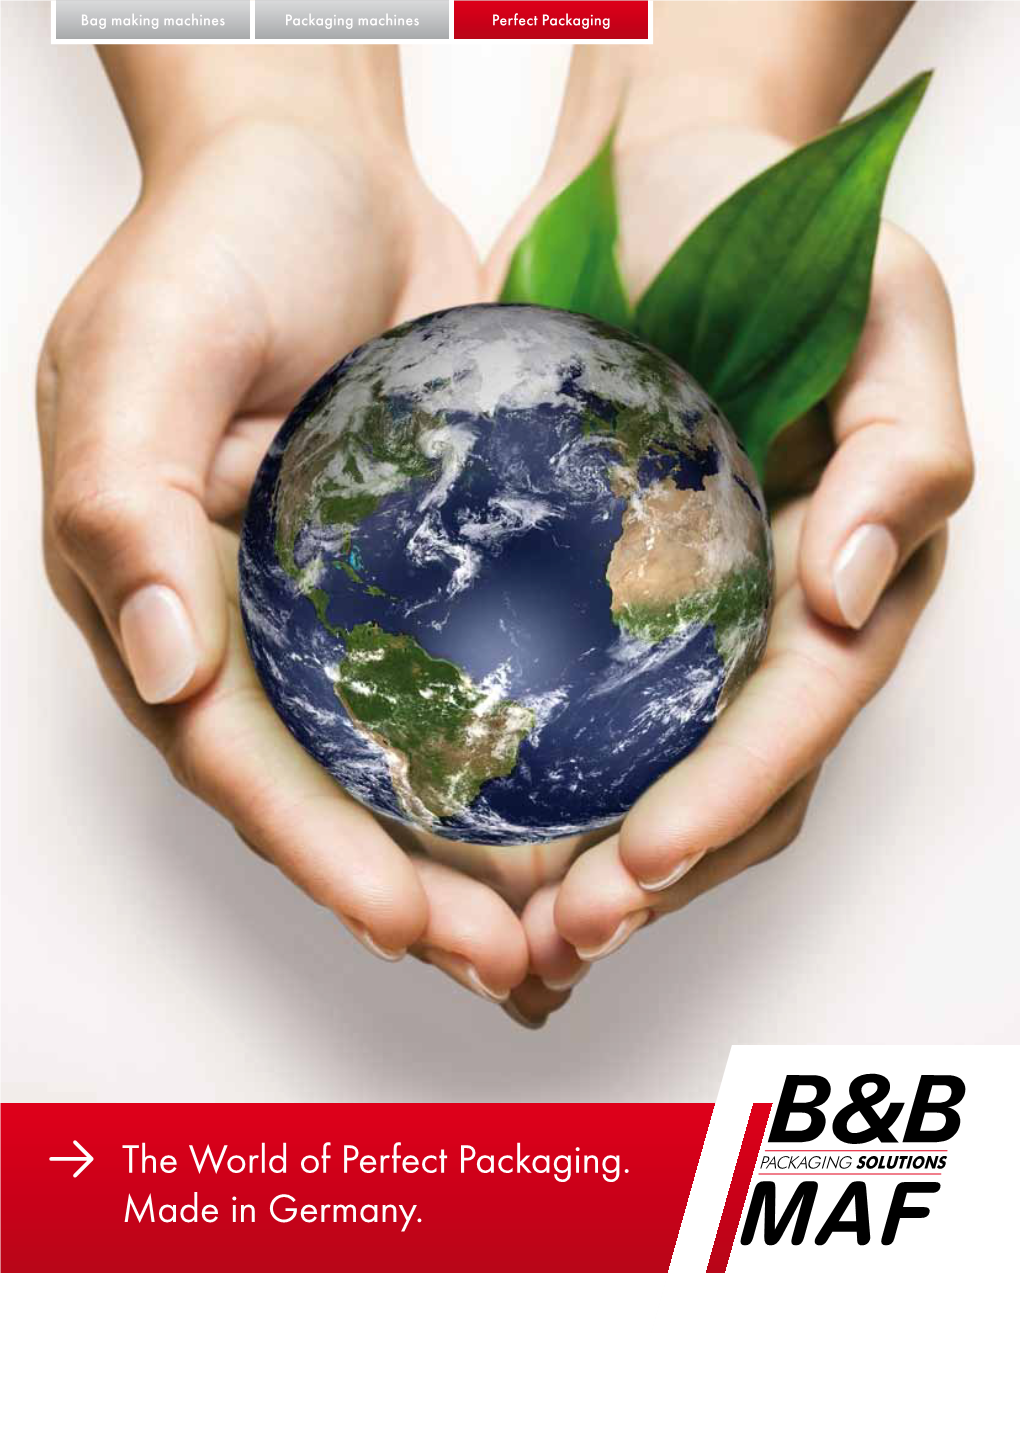 The World of Perfect Packaging. Made in Germany. Bag Making Machines Packaging Machines Perfect Packaging